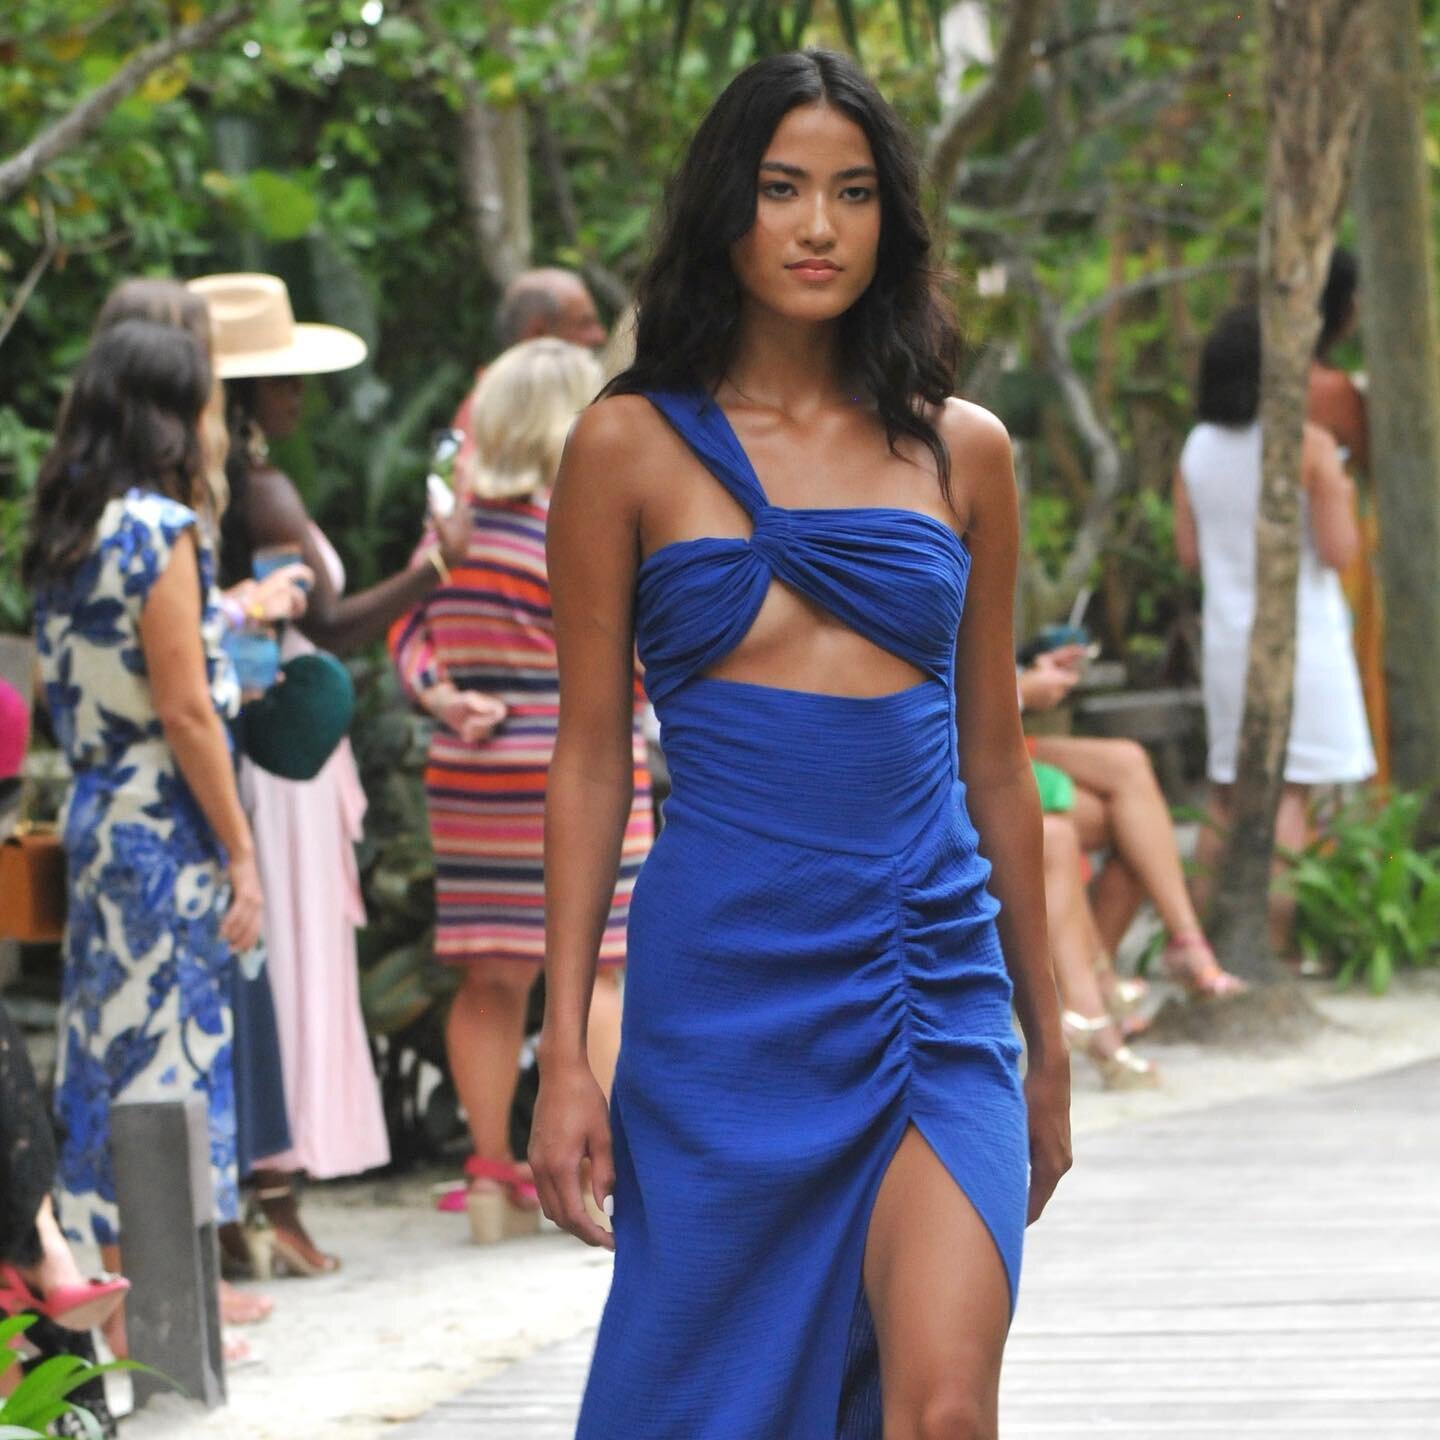 Effortless elegance at @justbeequeen fashion show at the @1hotel.southbeach Cocktail hour by @tresgentequila #paraisoMB #swimweek #miamiswimweek #summer #lifestyle